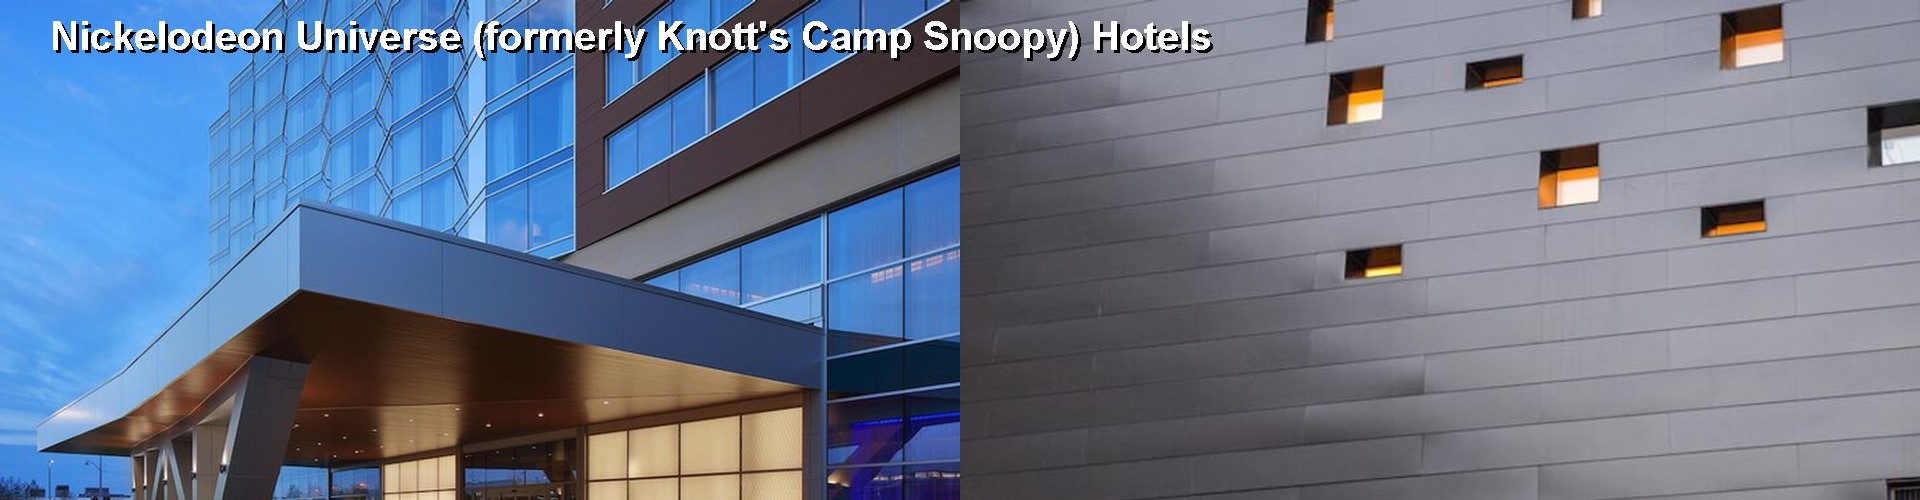 5 Best Hotels near Nickelodeon Universe (formerly Knott's Camp Snoopy)